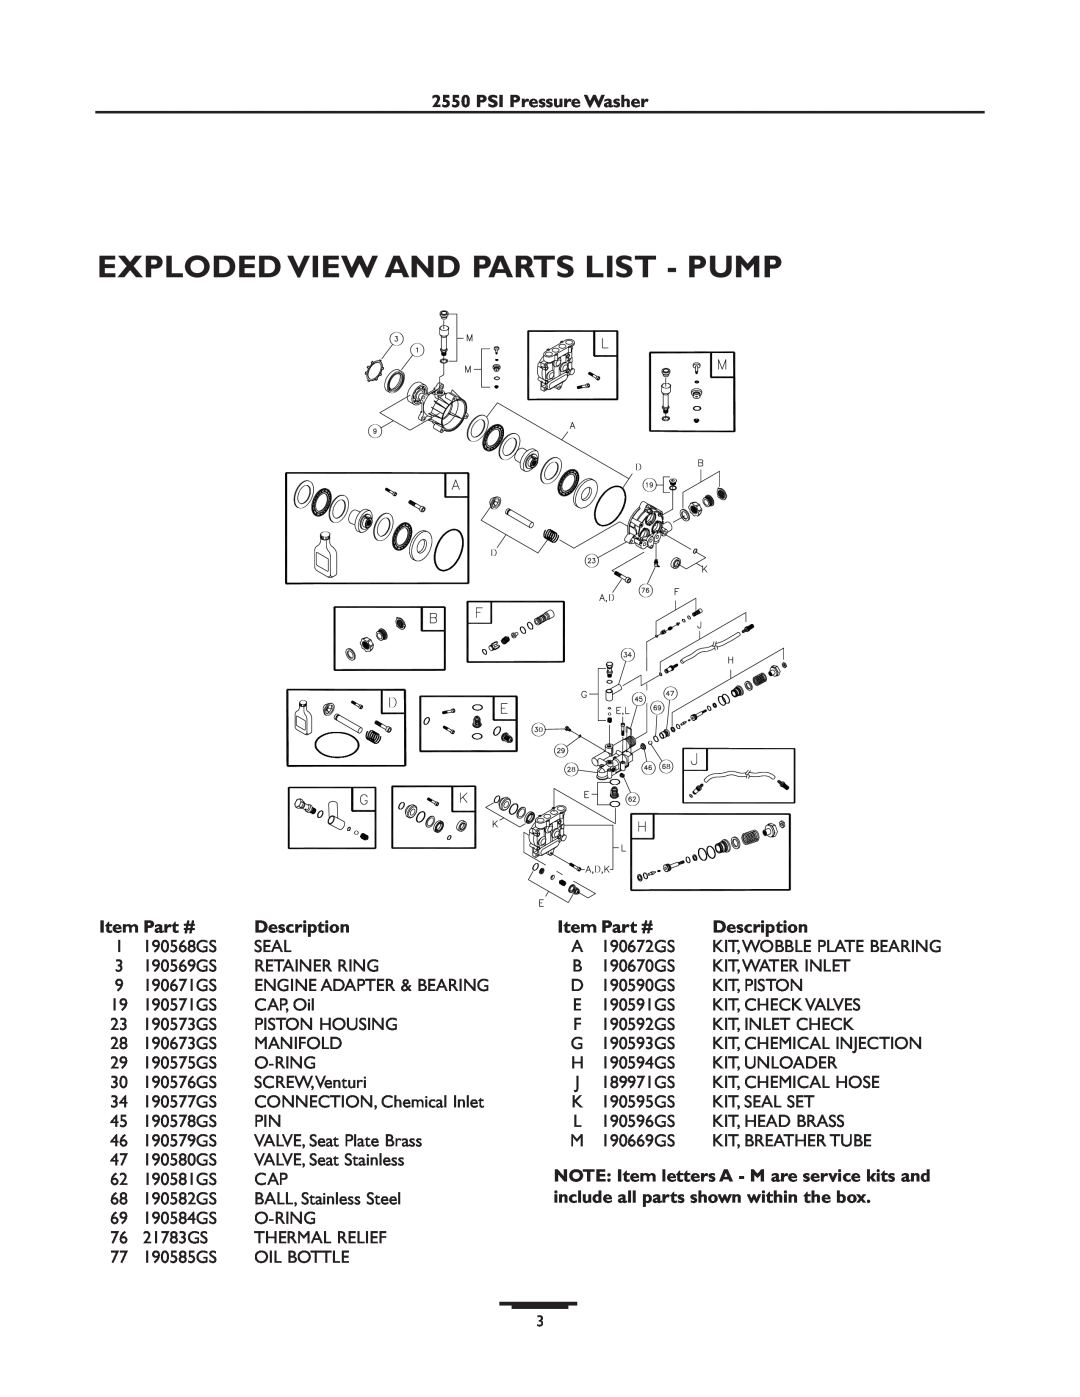 Briggs & Stratton 01936 Exploded View And Parts List - Pump, NOTE Item letters A - M are service kits and, Description 